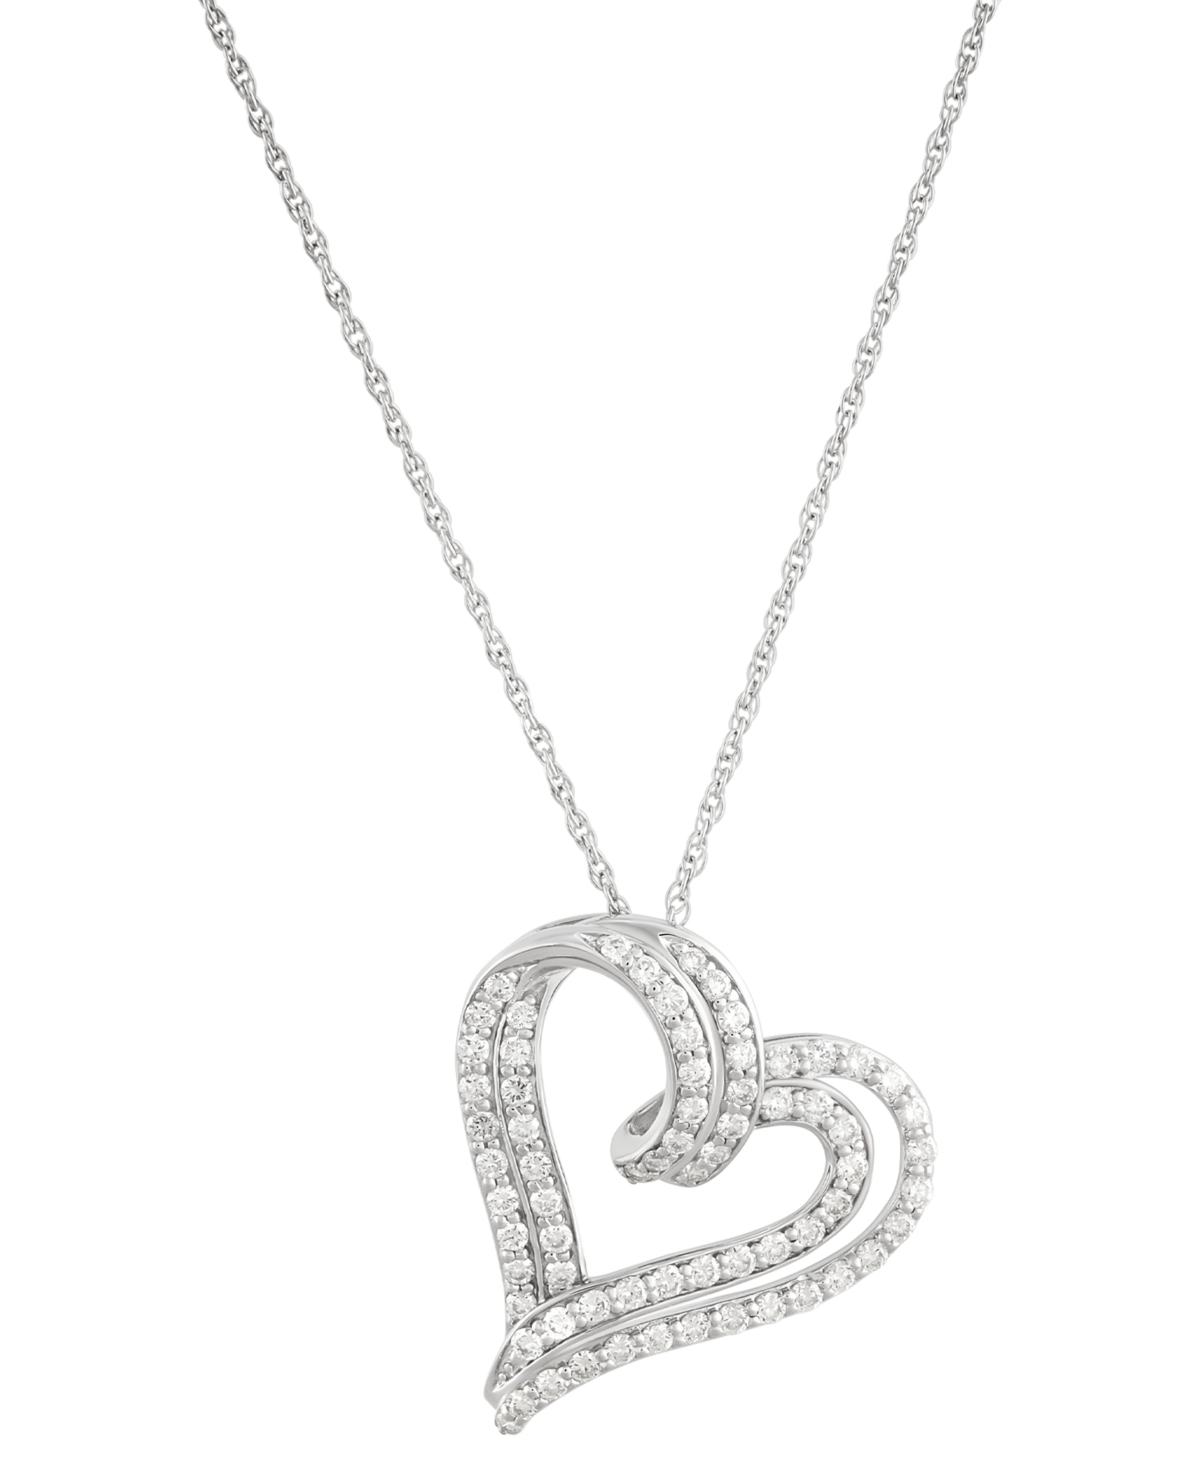 Lab Grown Diamond Double Heart Pendant Necklace (1 ct. t.w.) in Sterling Silver, 16" + 2" extender - Sterling Silver